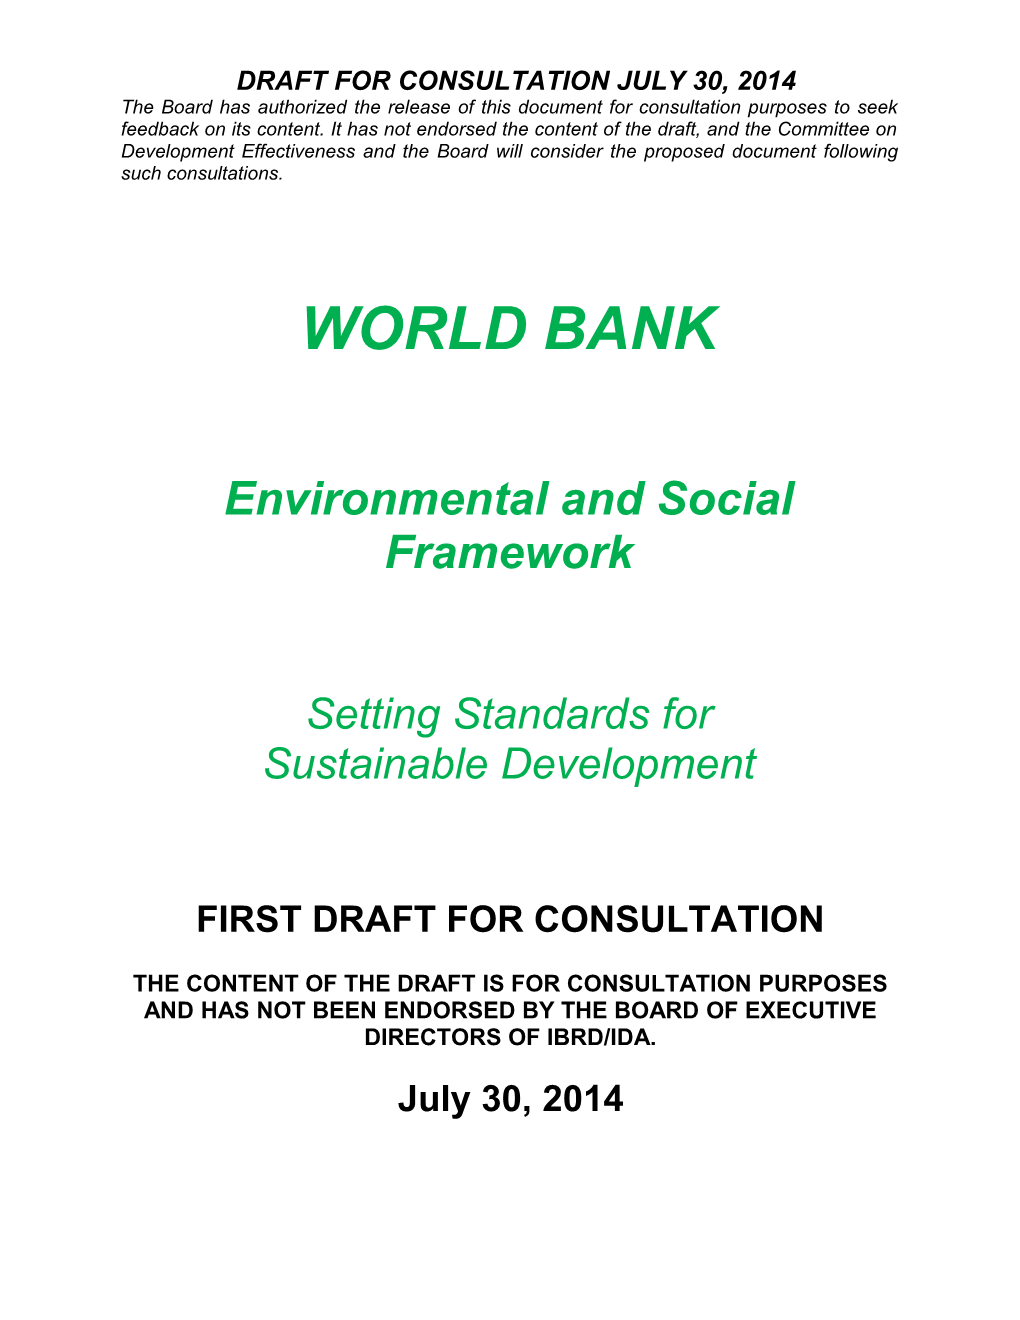 Draft for Consultation July 30, 2014